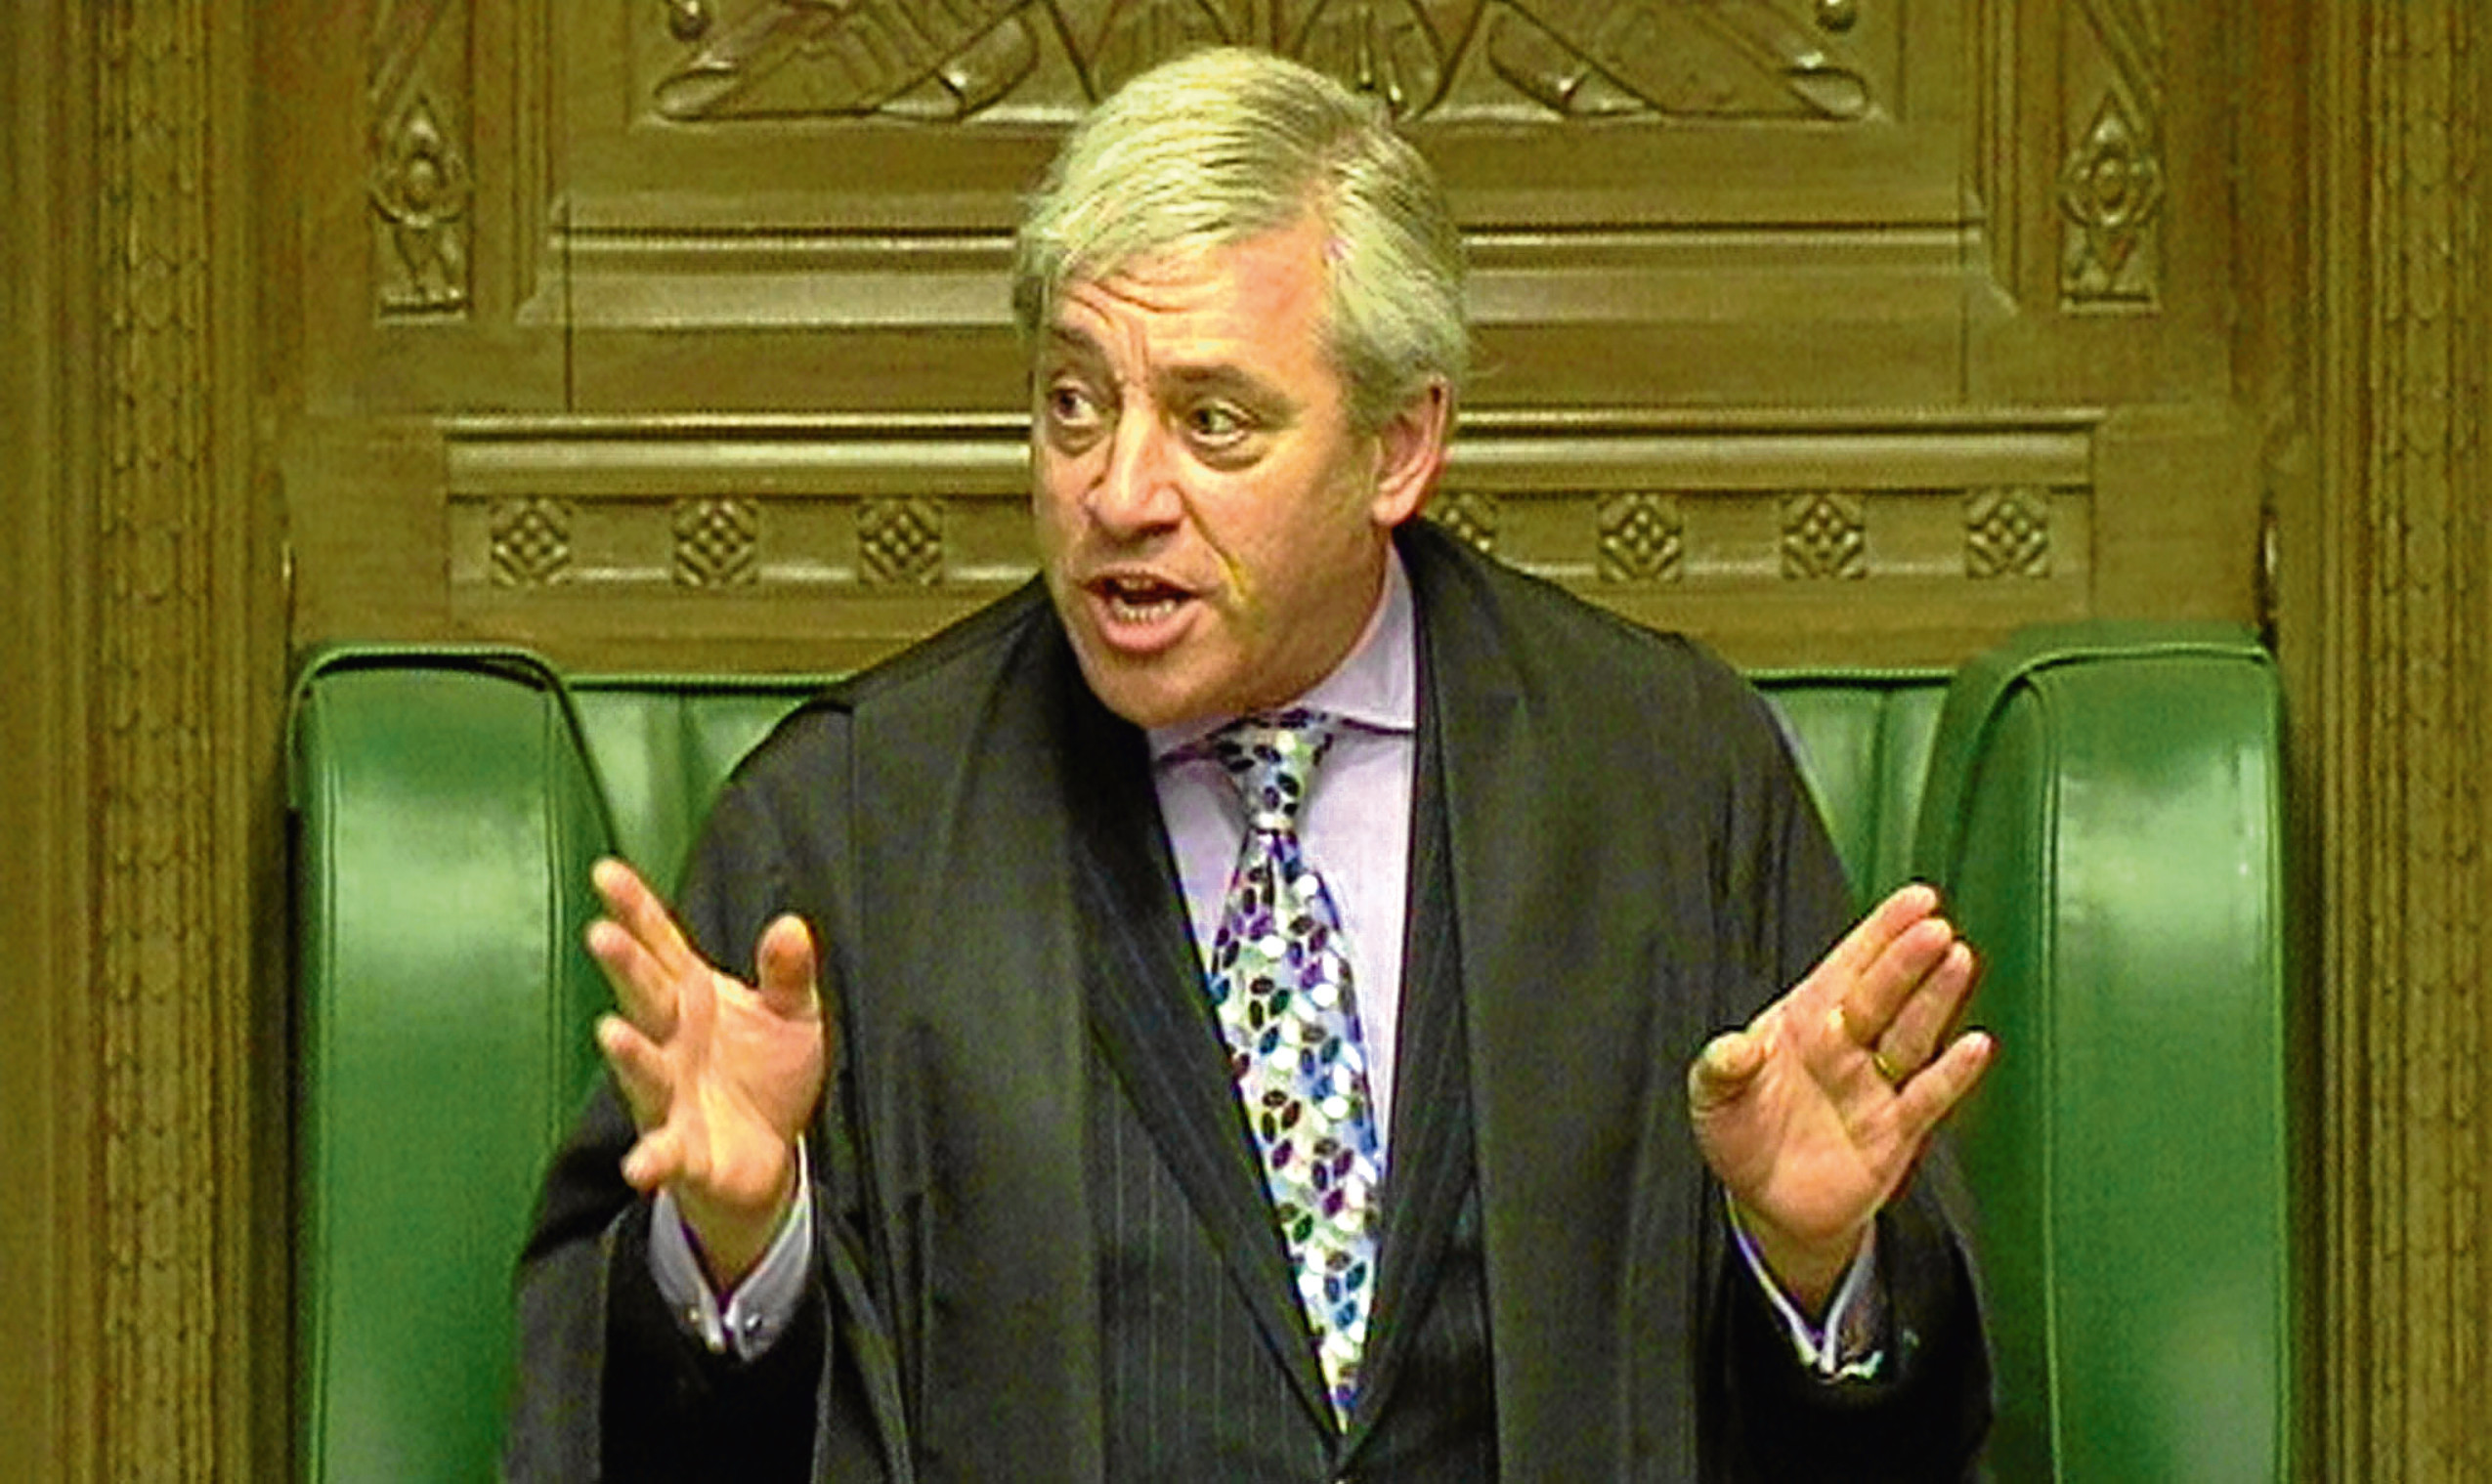 House of Commons Speaker John Bercows comments sparked controversy.